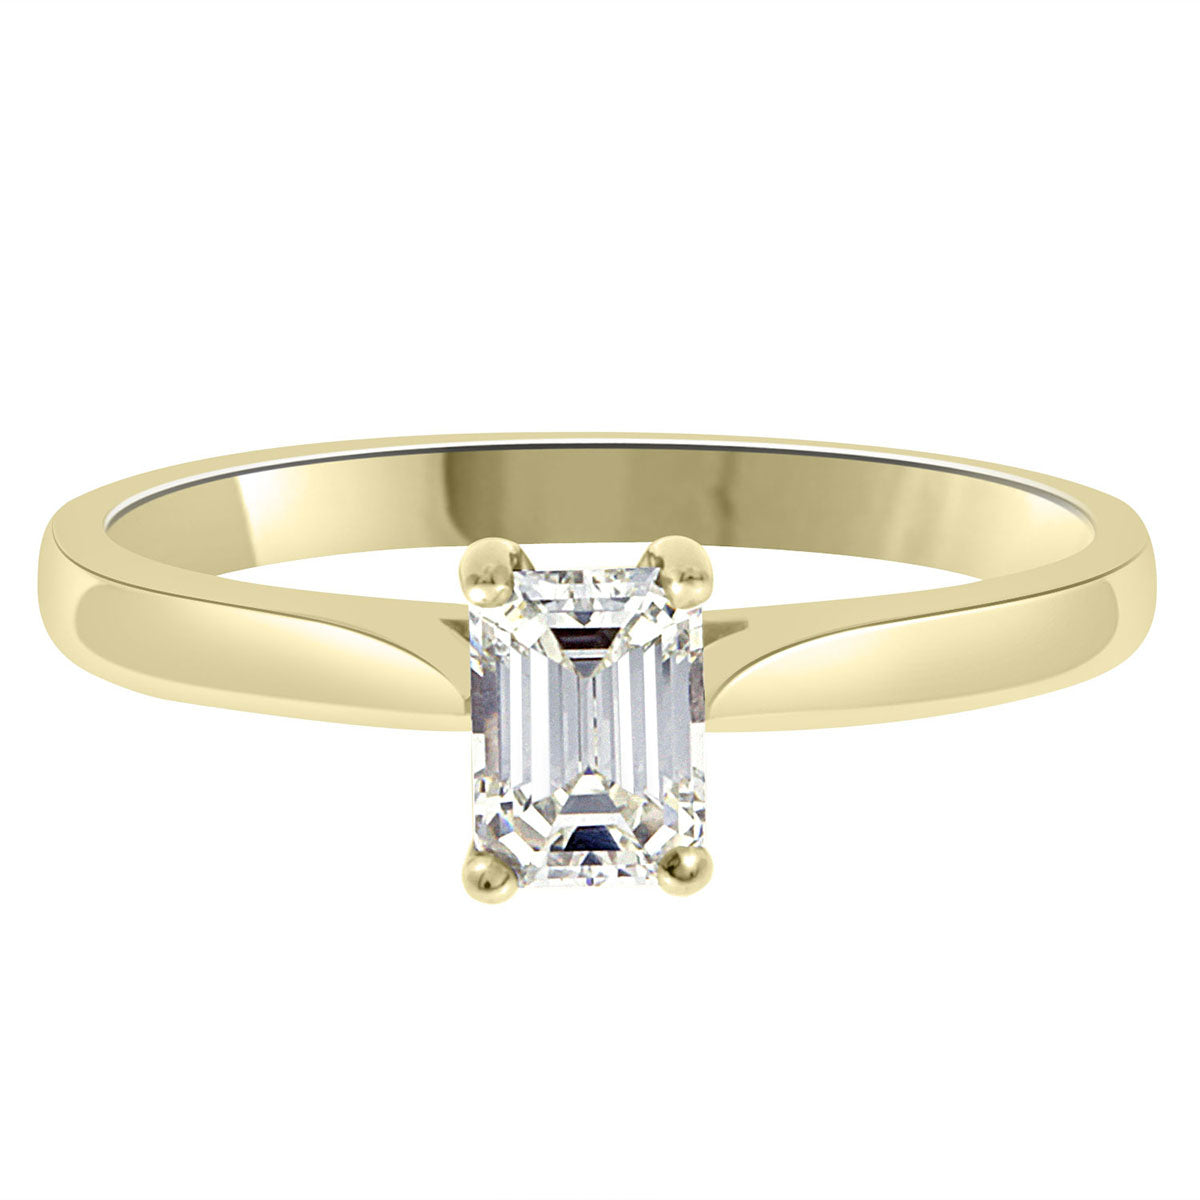 Emerald Cut Ring Solitaire Engagement Ring in yellow gold